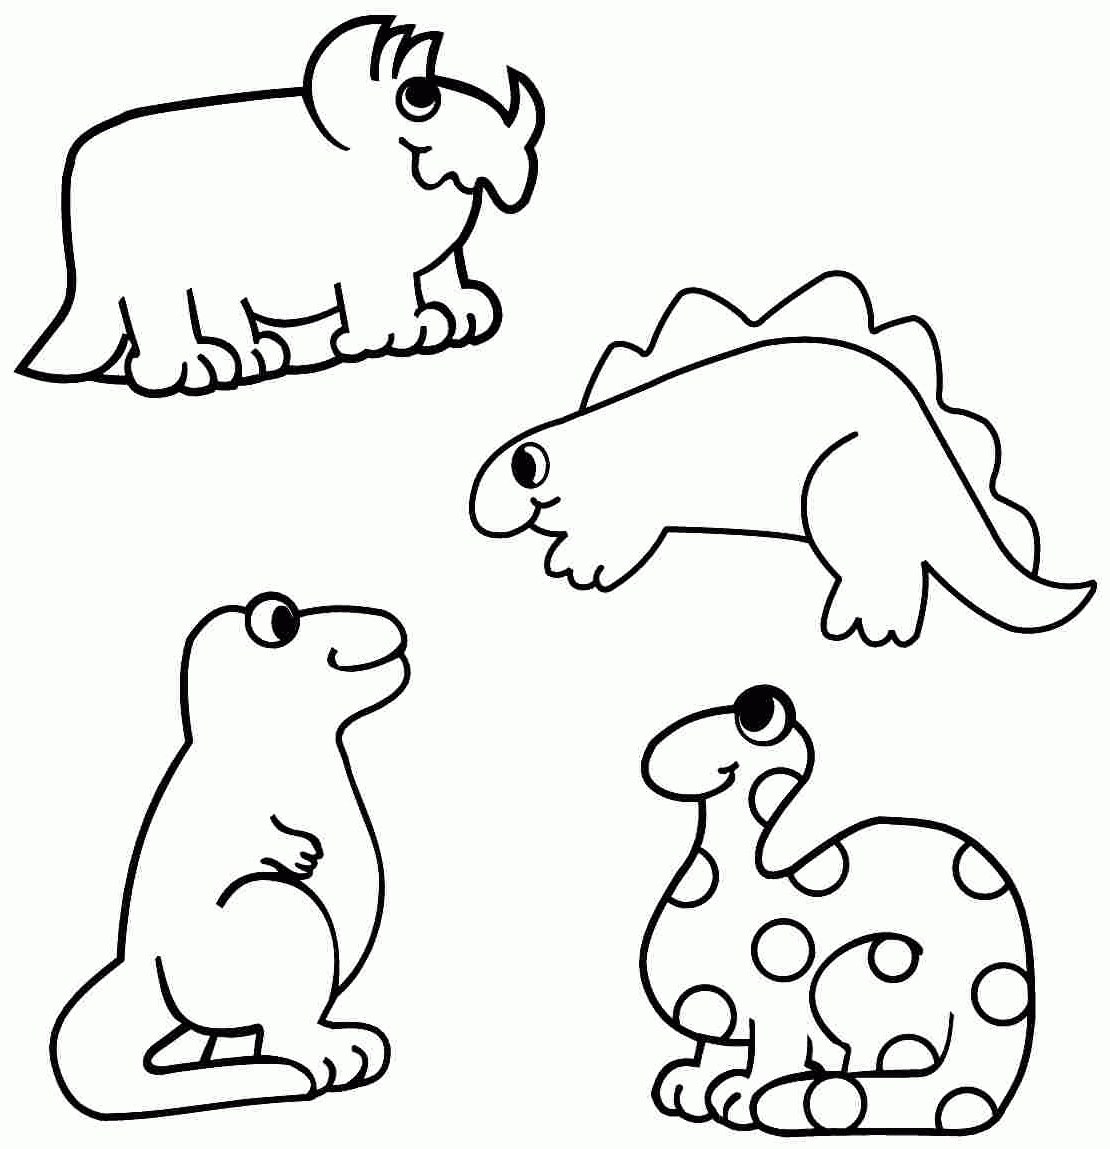 Dinosaur Coloring Pages For Preschooler